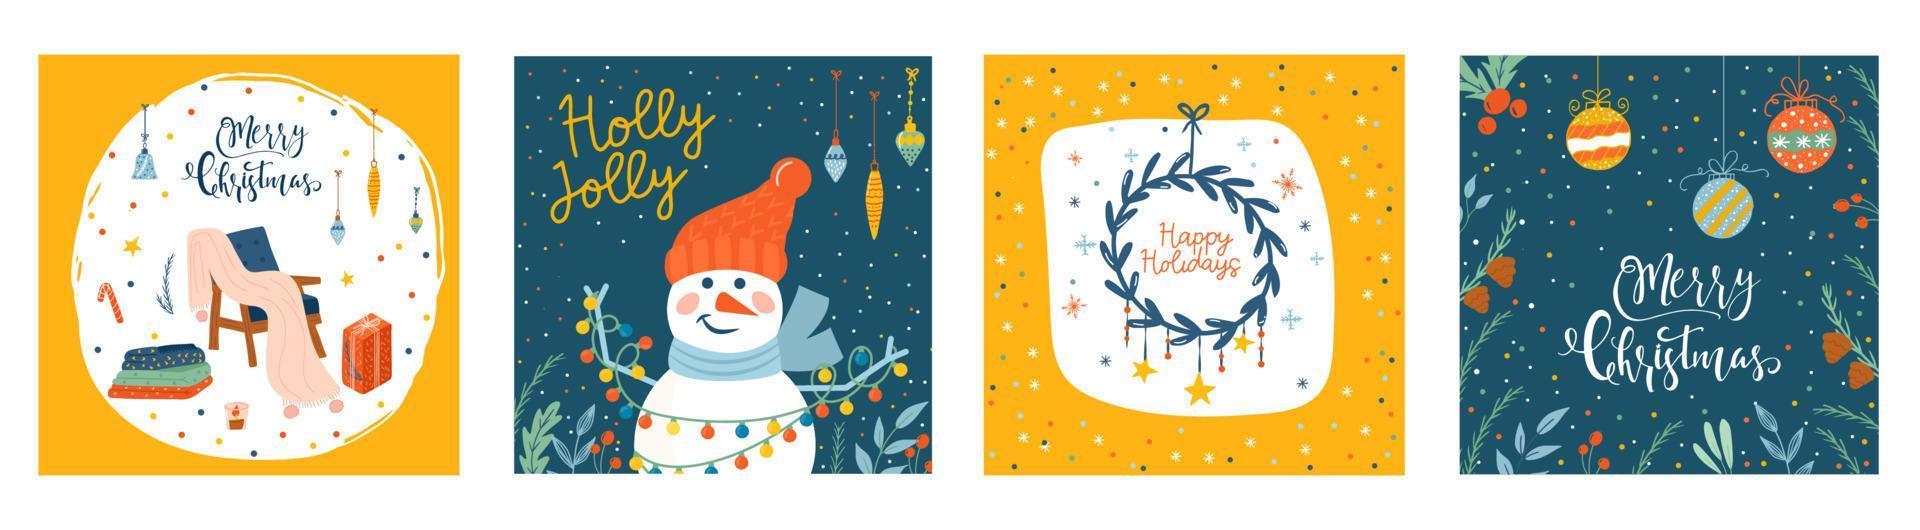 4 Greeting card of Christmas decorations with text. Postcard with bauble, text, wreath, gifts, floral. Kids illustration. Scrapbook trendy collection vector